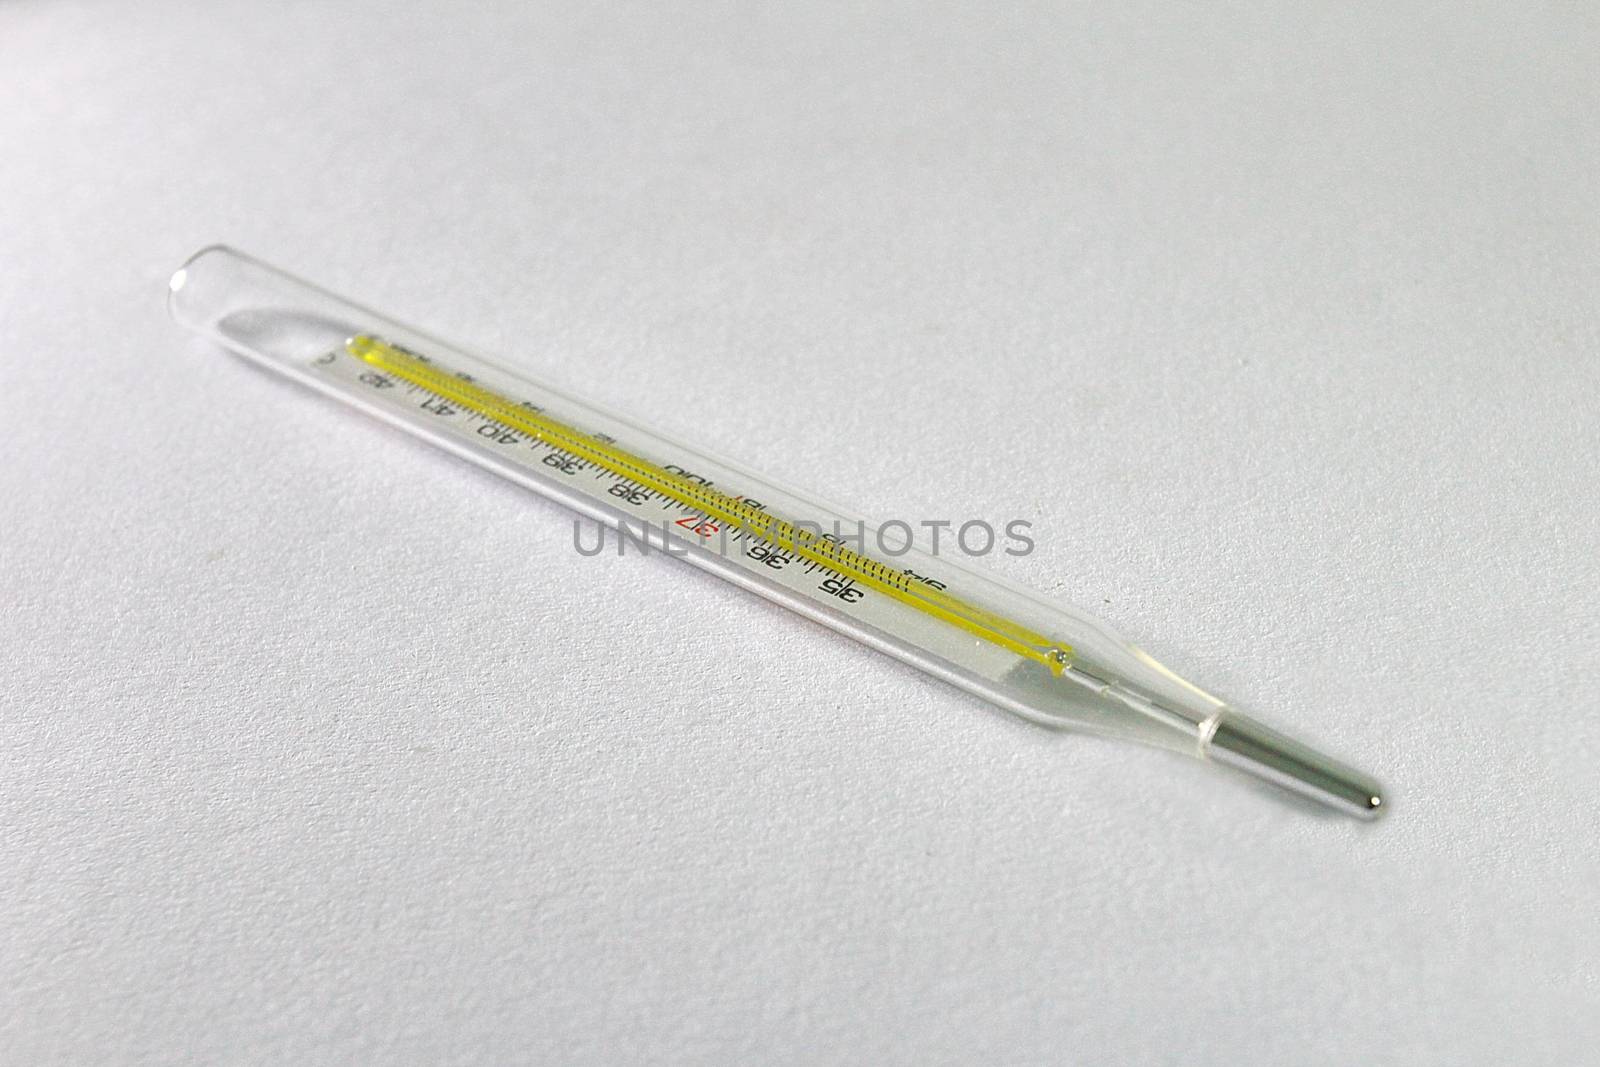 clinical thermometer by kaidevil